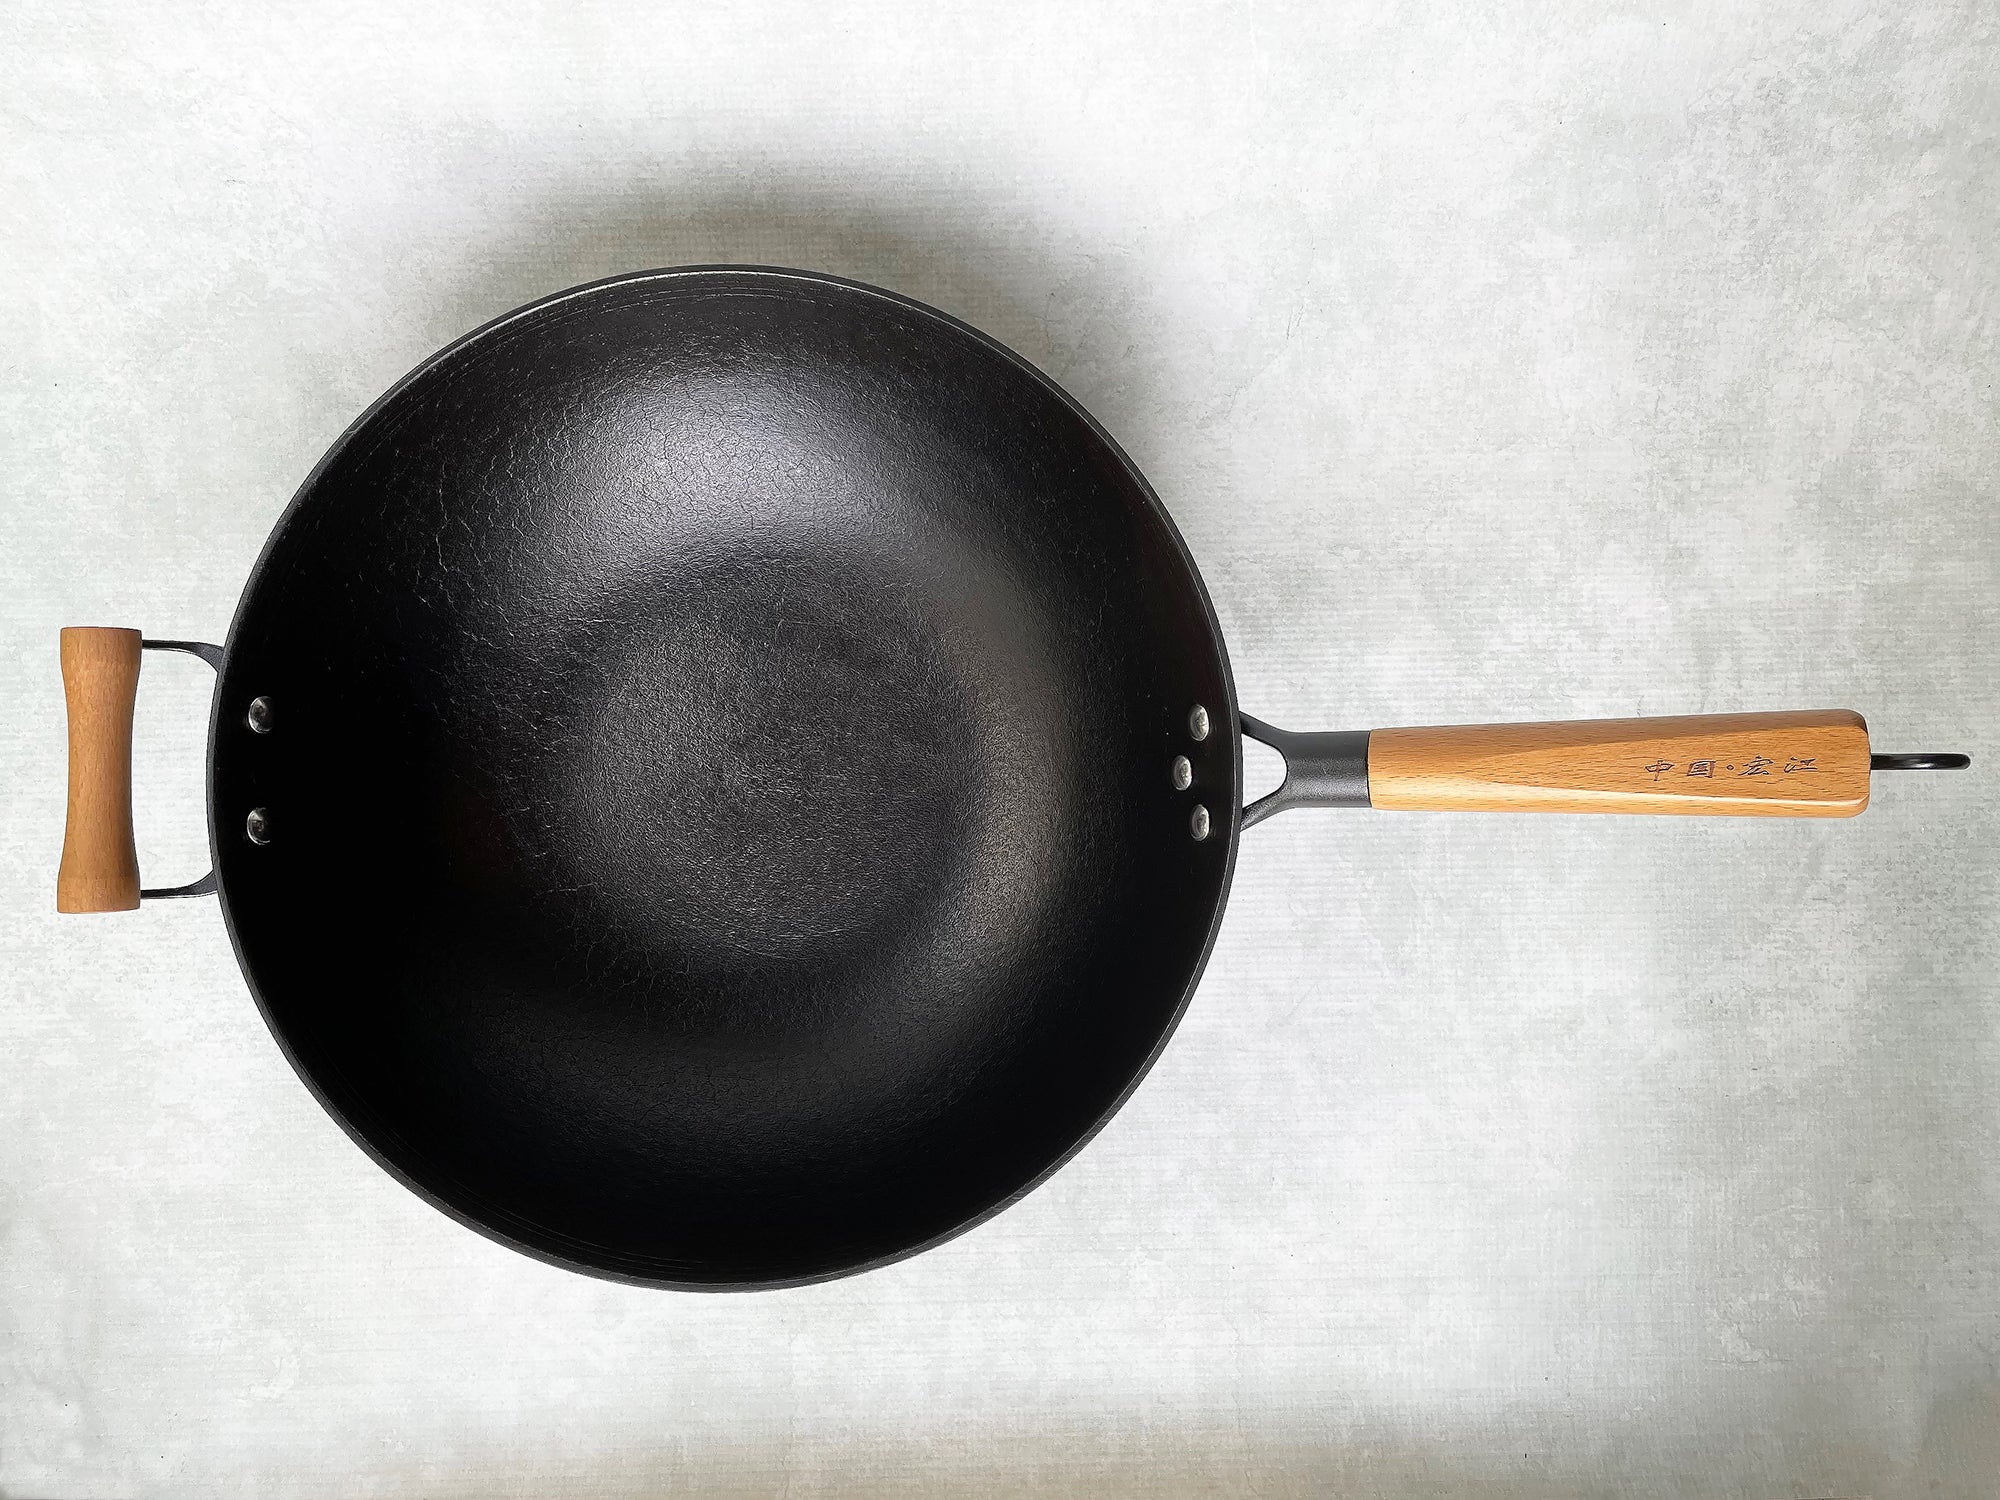  Cast Iron Skillets Lightweight Frying Pans with